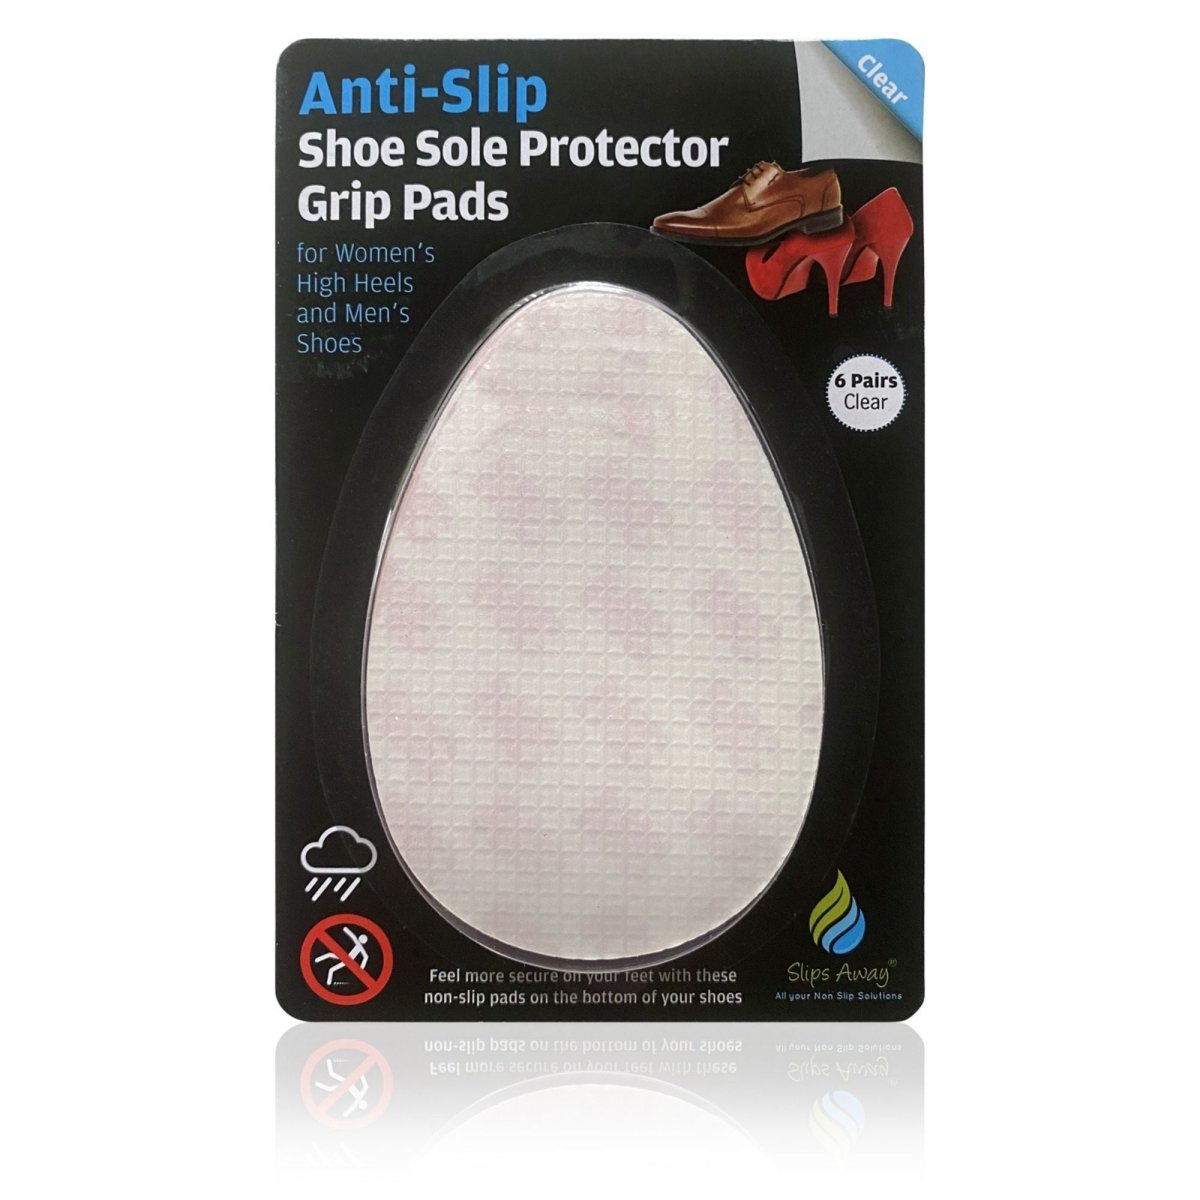 Slips Away Anti-Slip Shoe Pads: Enhancing Safety and Stability - Slips Away